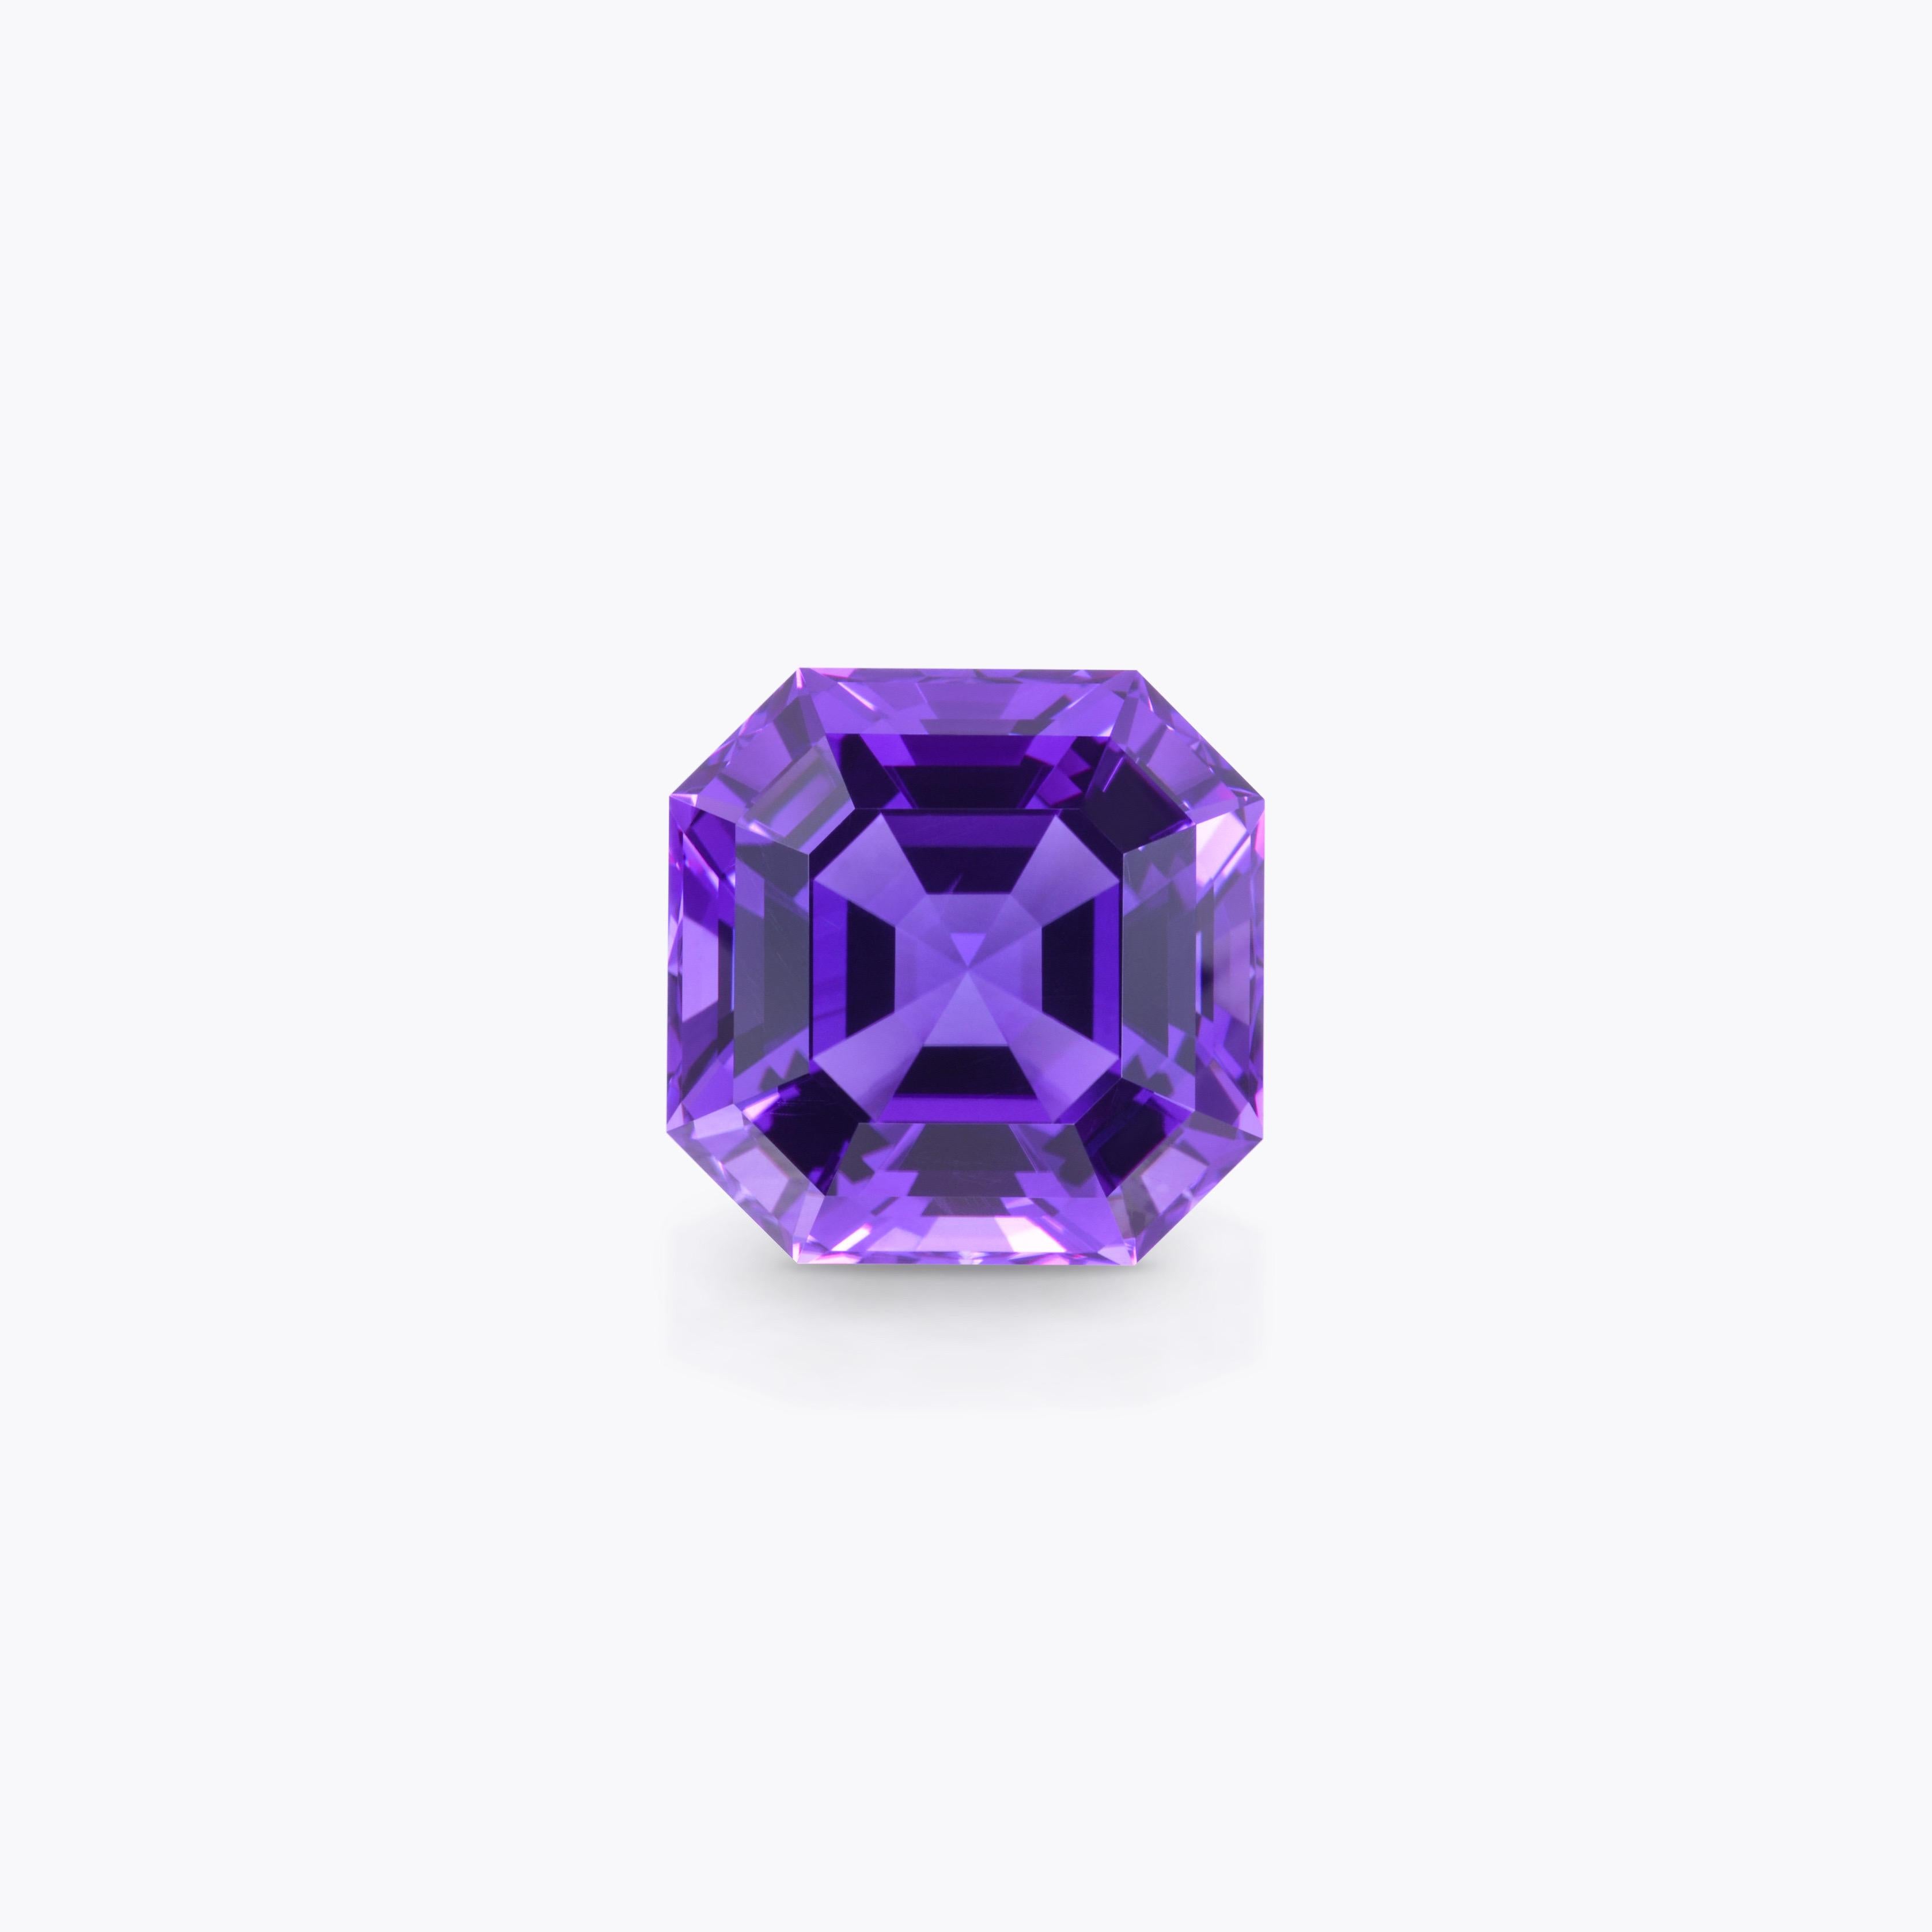 Conversational 83.27 carat natural Brazilian Amethyst square-octagon, Asscher cut, unmounted gem, offered loose to an avid gemstone collector.
Returns are accepted and paid by us within 7 days of delivery.
We offer supreme custom jewelry work upon